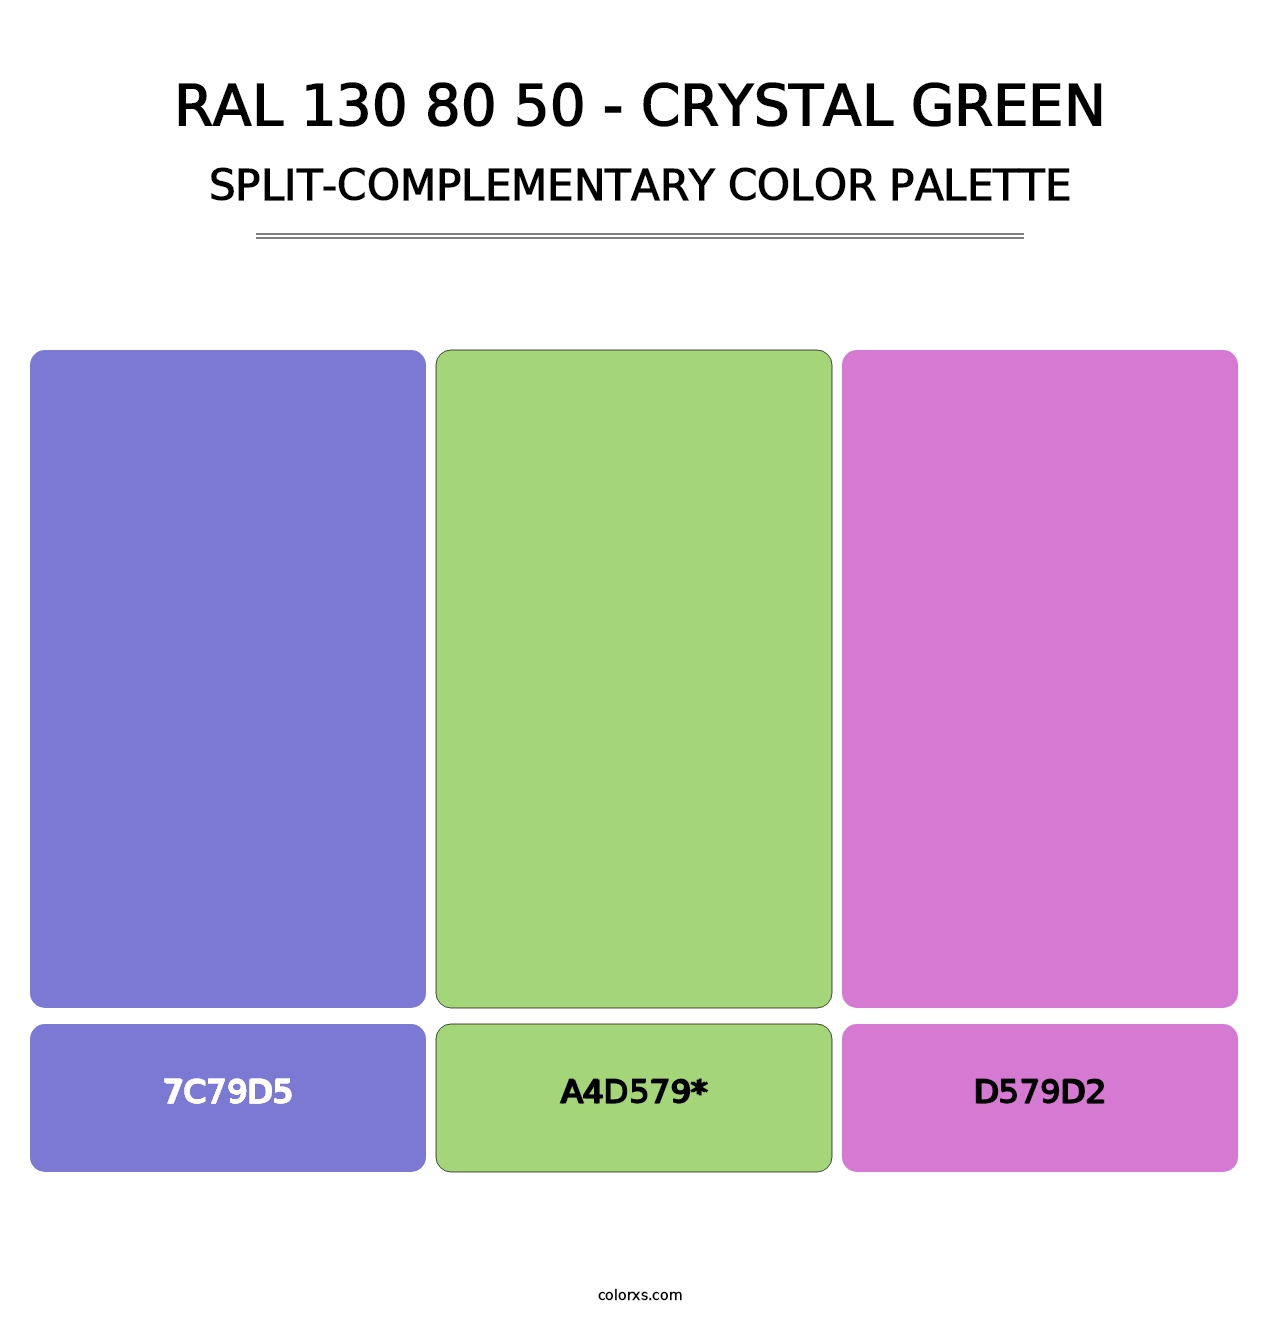 RAL 130 80 50 - Crystal Green - Split-Complementary Color Palette